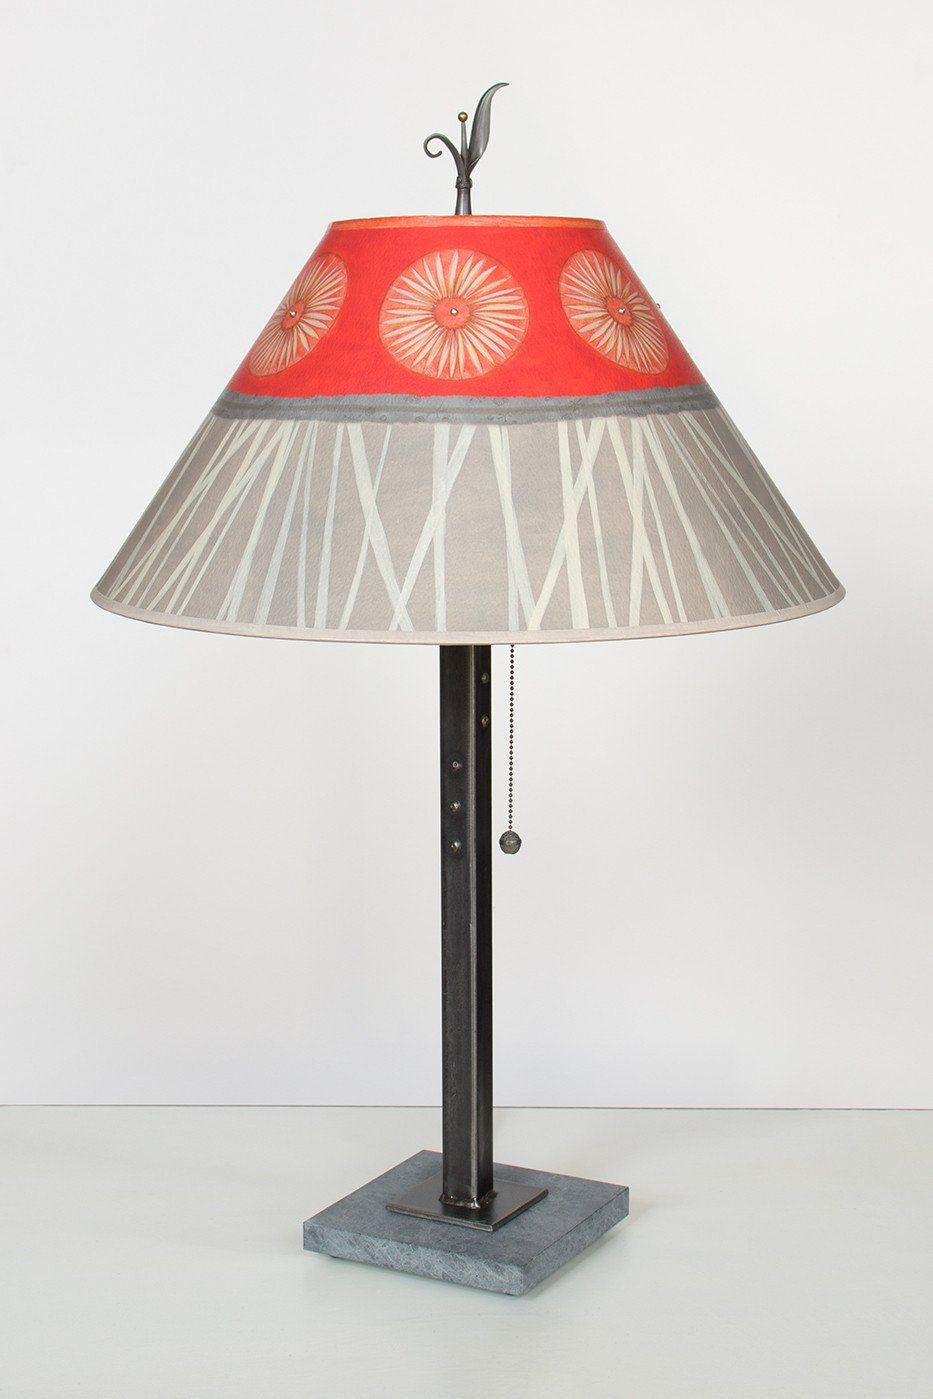 Janna Ugone & Co Table Lamps Steel Table Lamp with Large Conical Shade in Tang